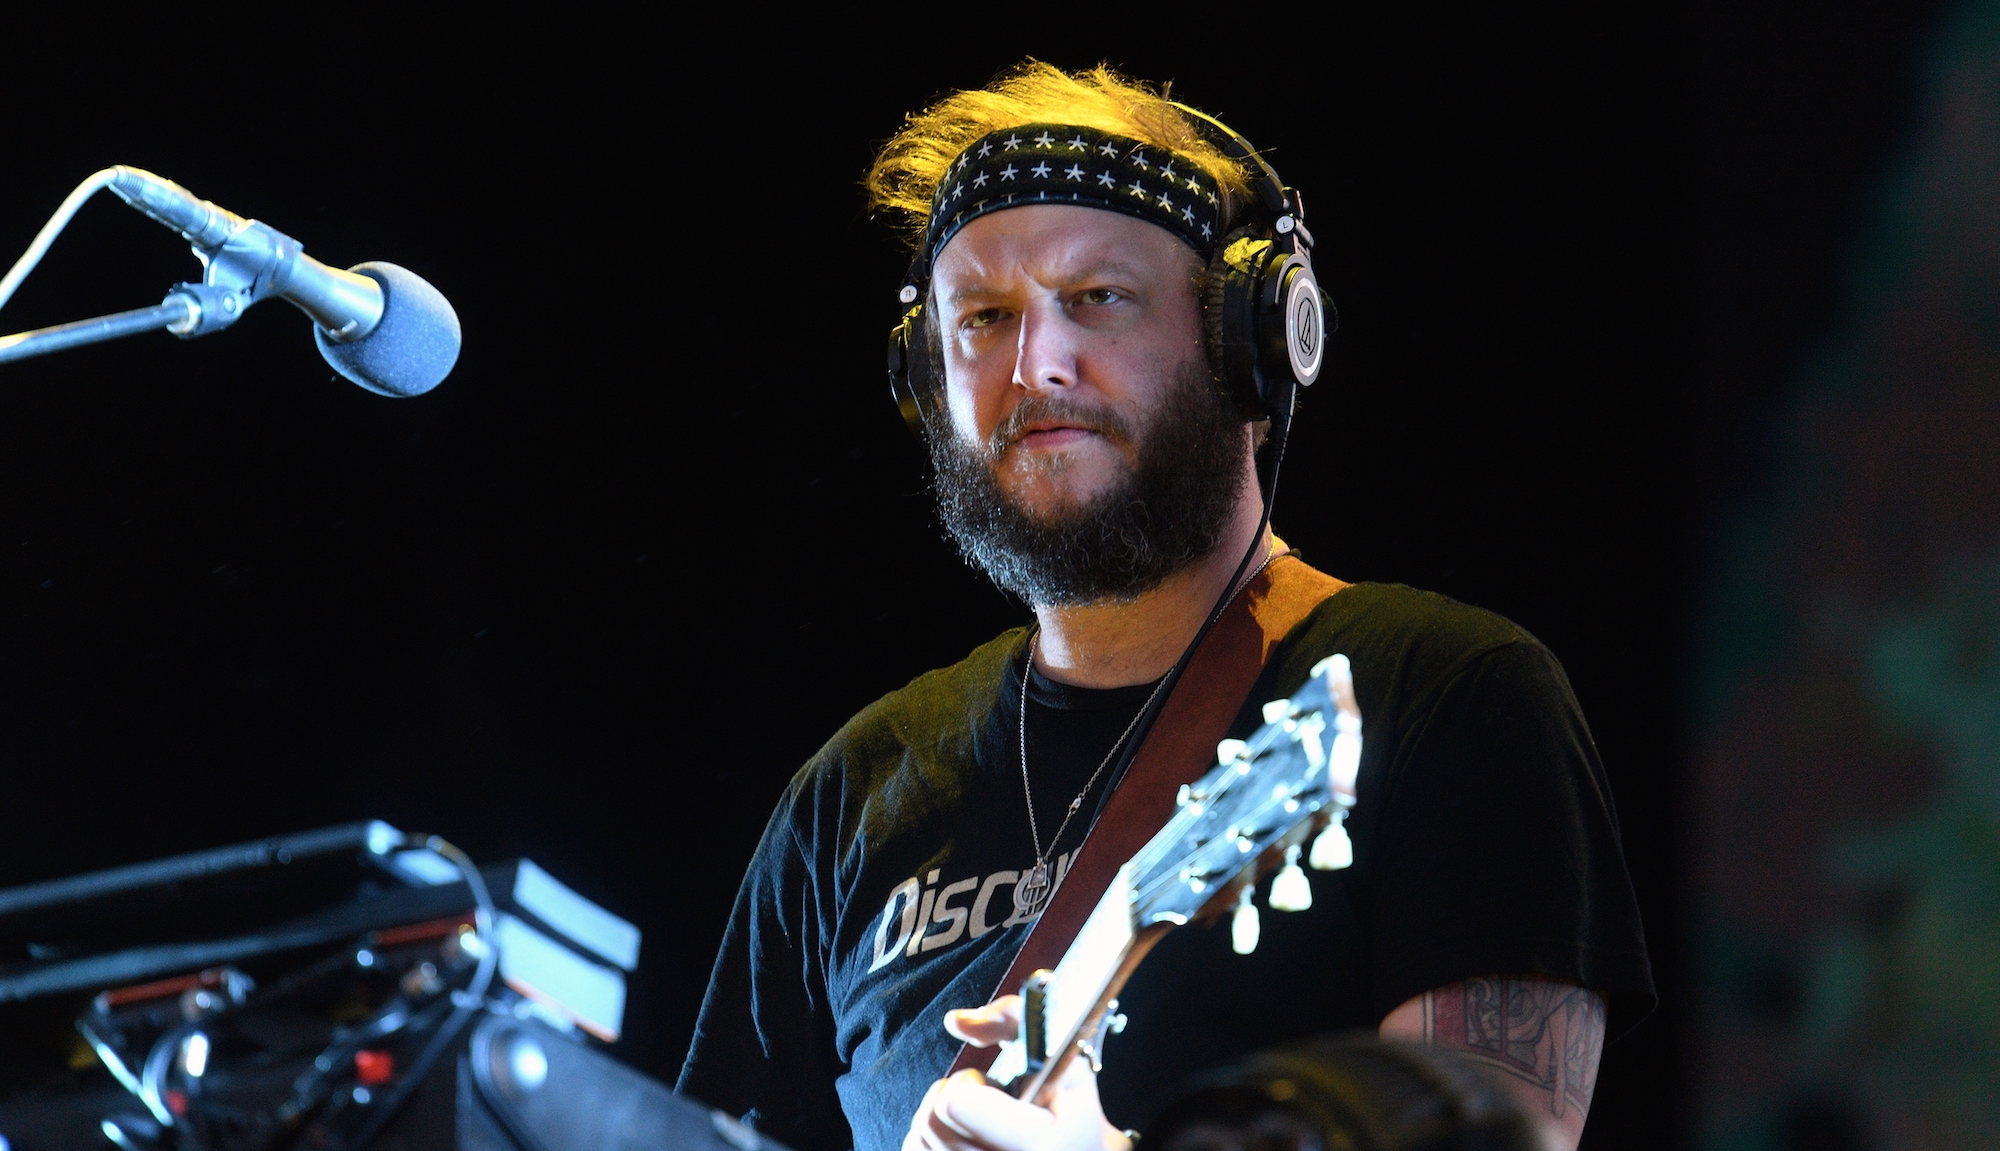 Bon Ivers Justin Vernon live beim All Points East Festival am 2. Juni 2019 in London